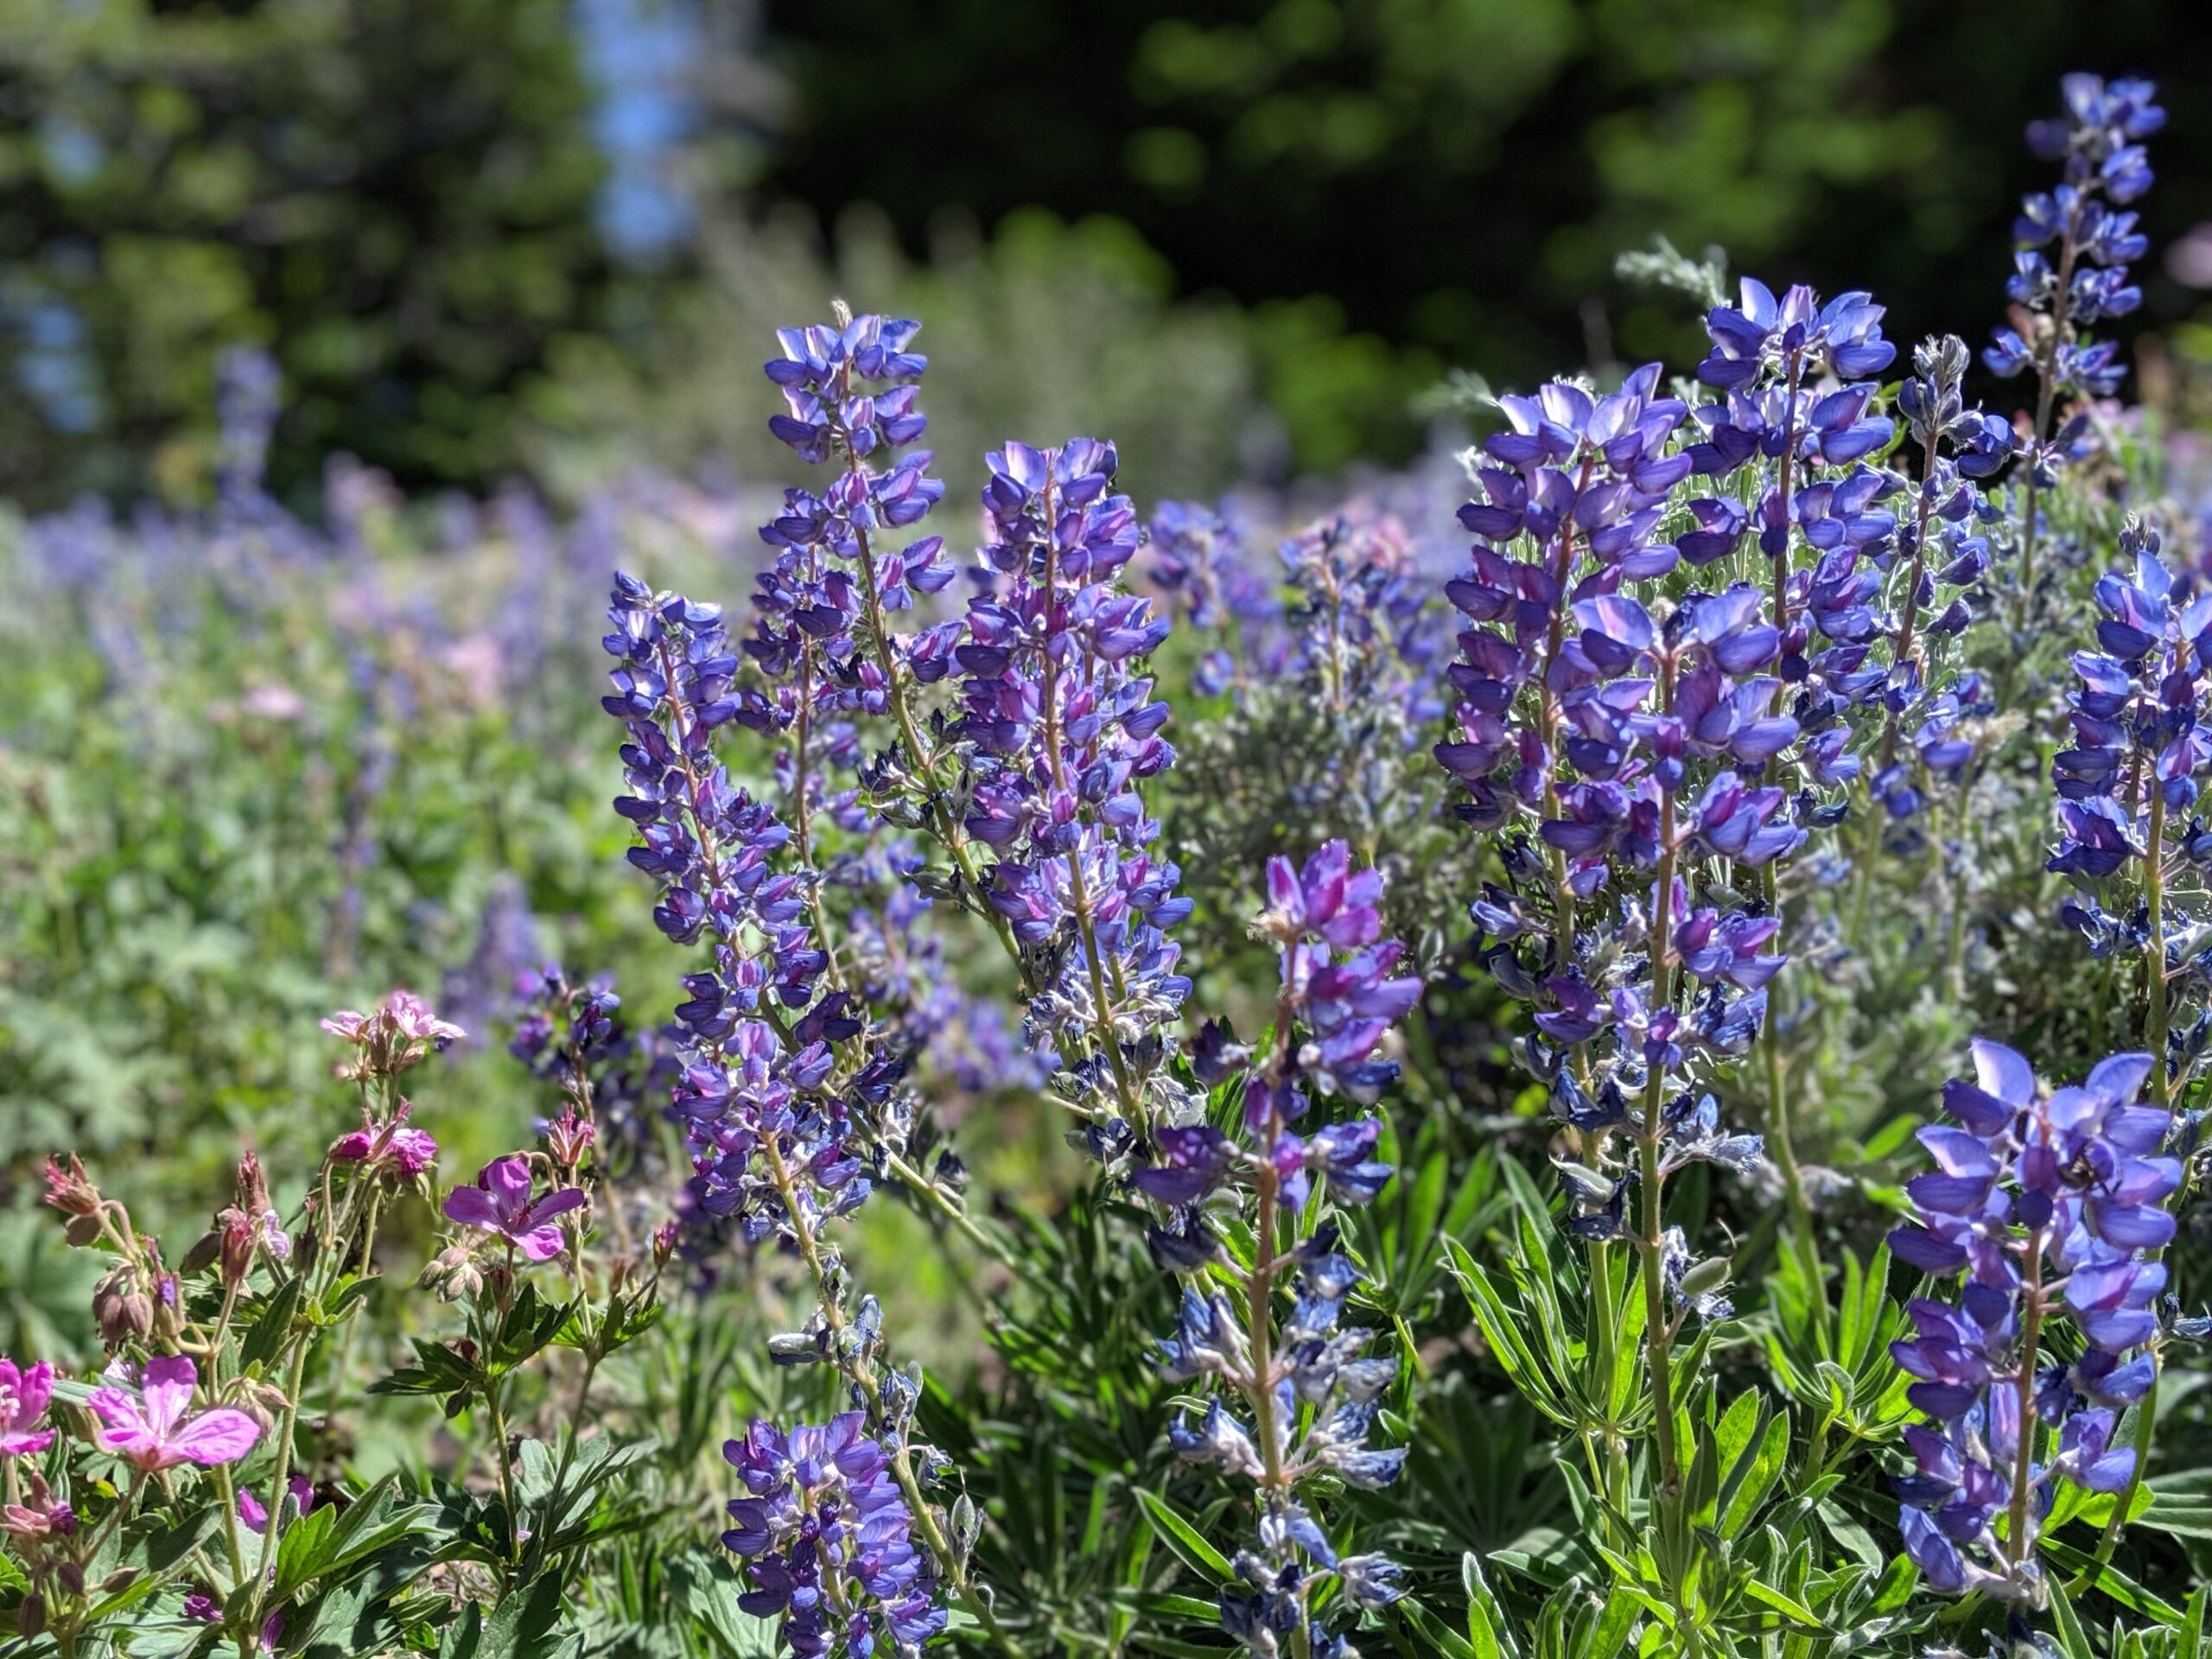 Why planting wildflowers makes a difference